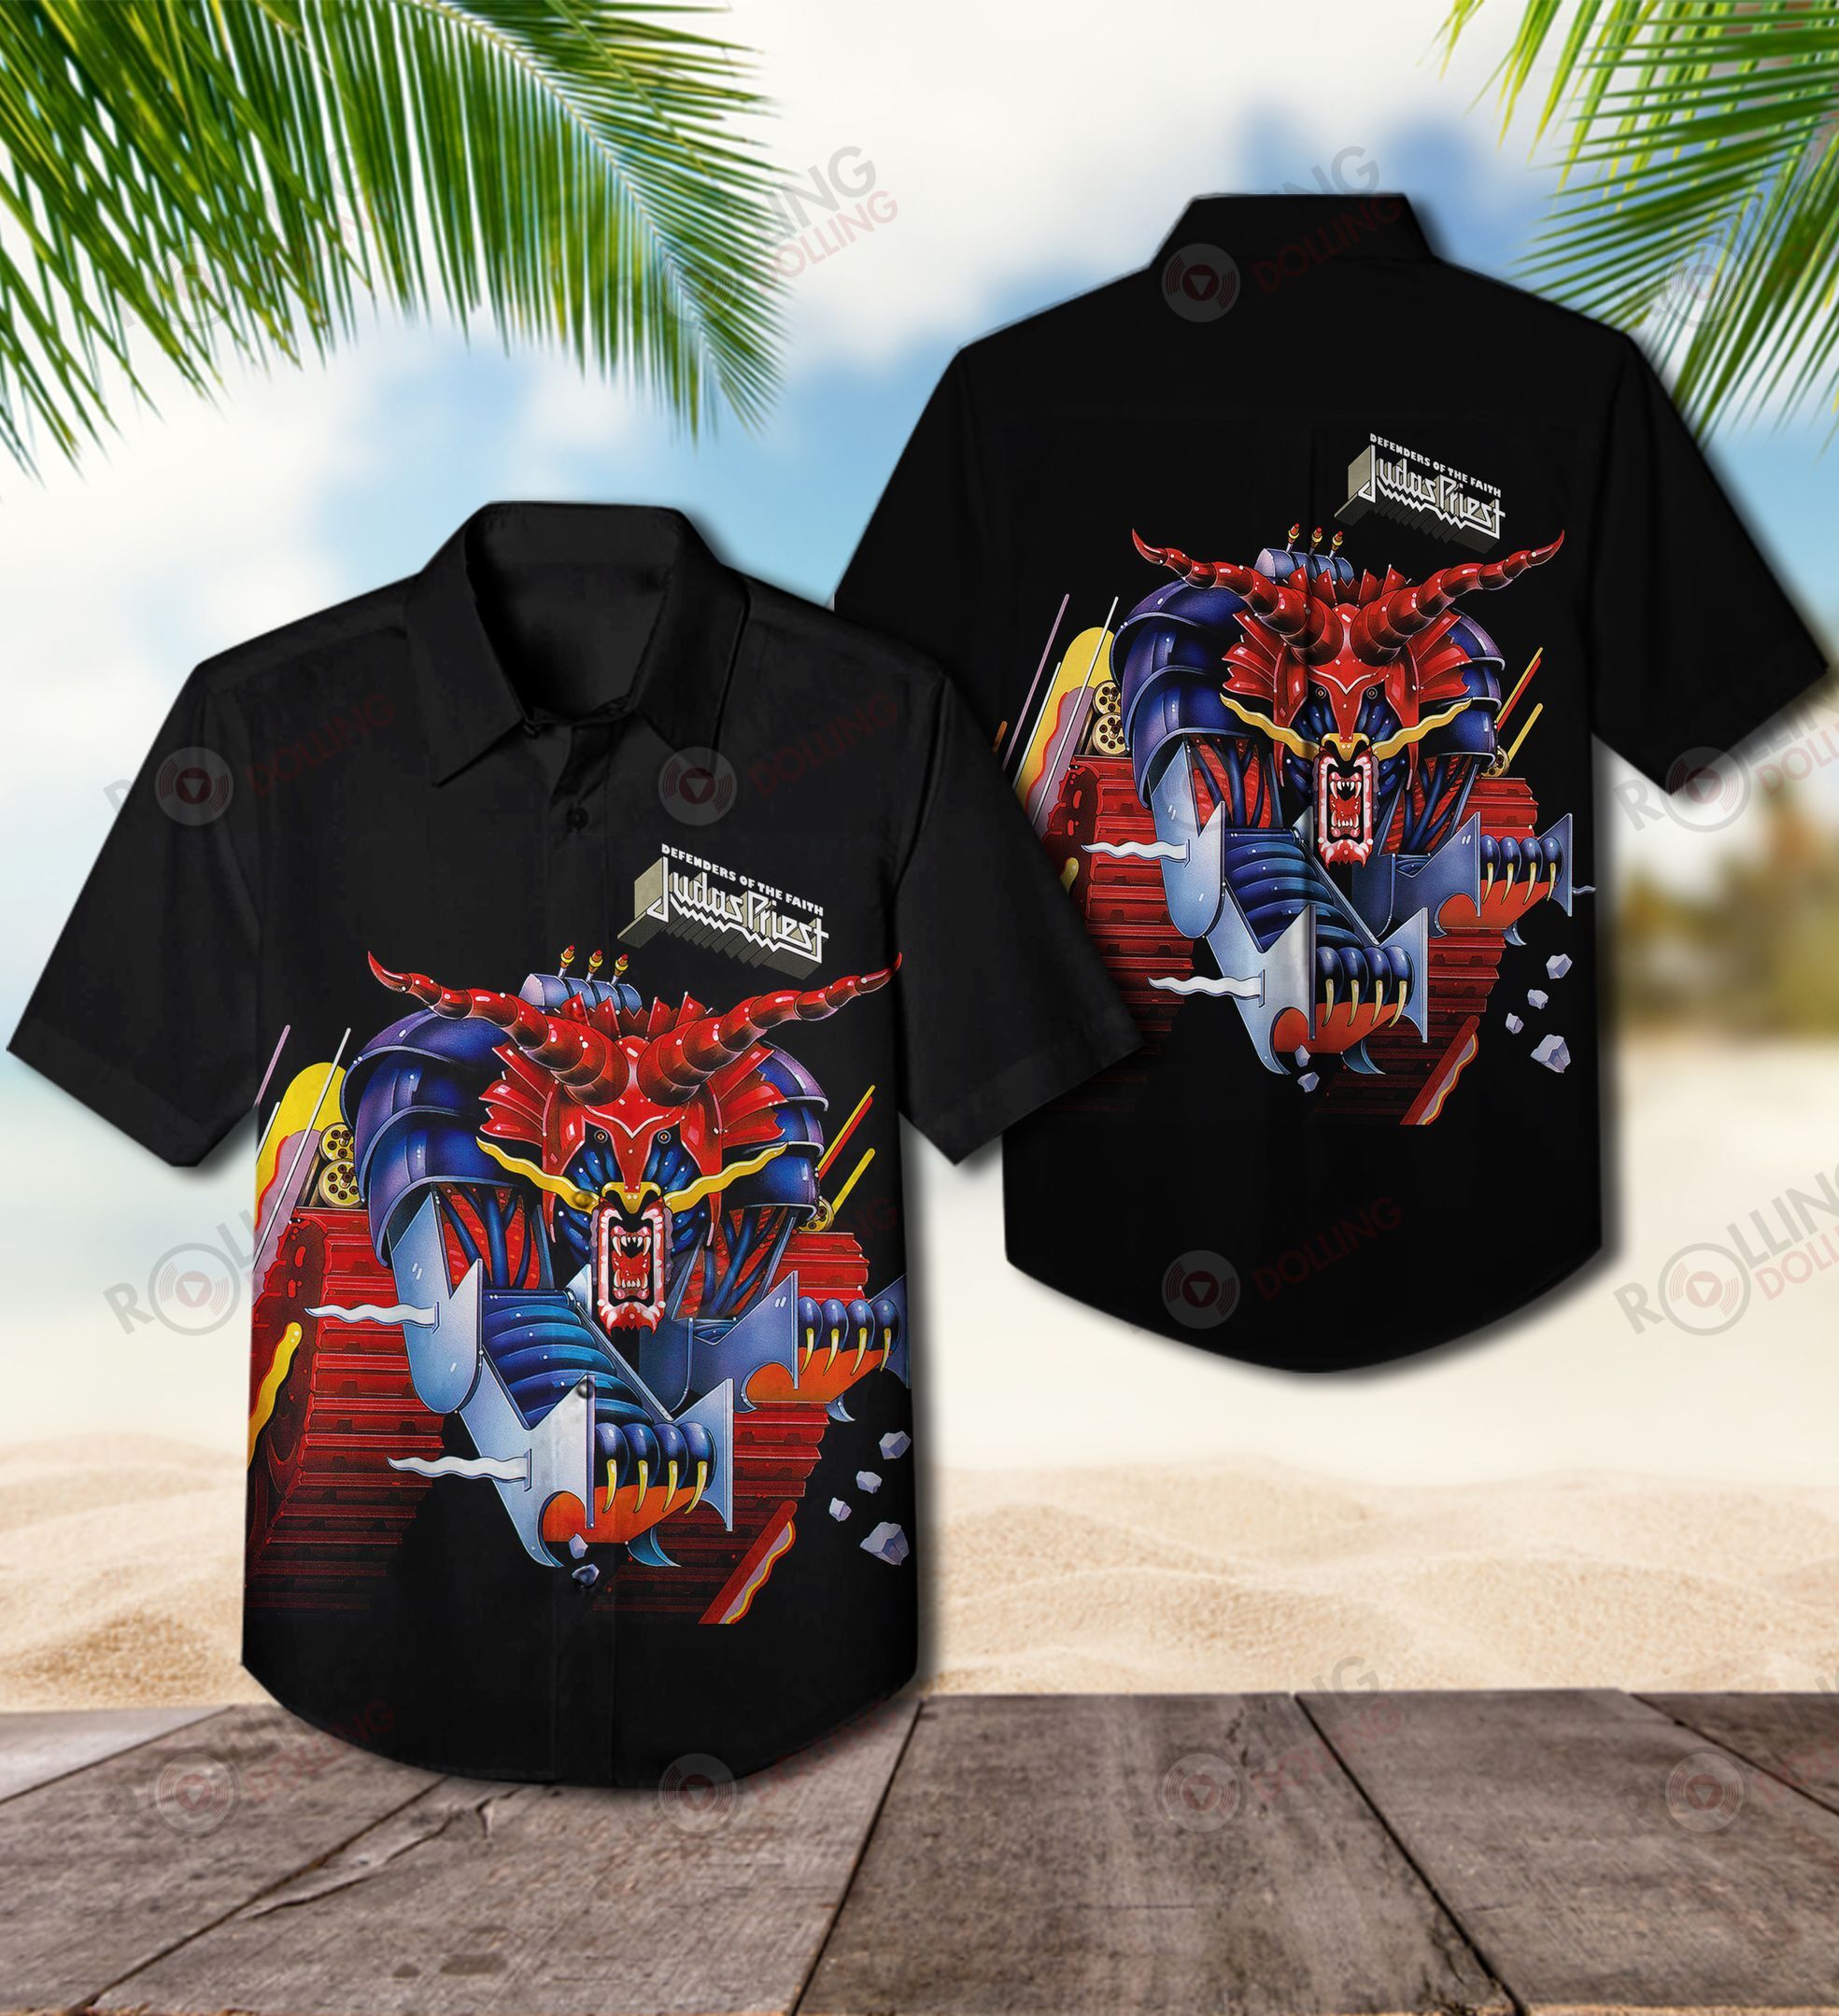 For Summer, Consider Wearing This Amazing Hawaiian Shirt Shirt In Our Store Word3